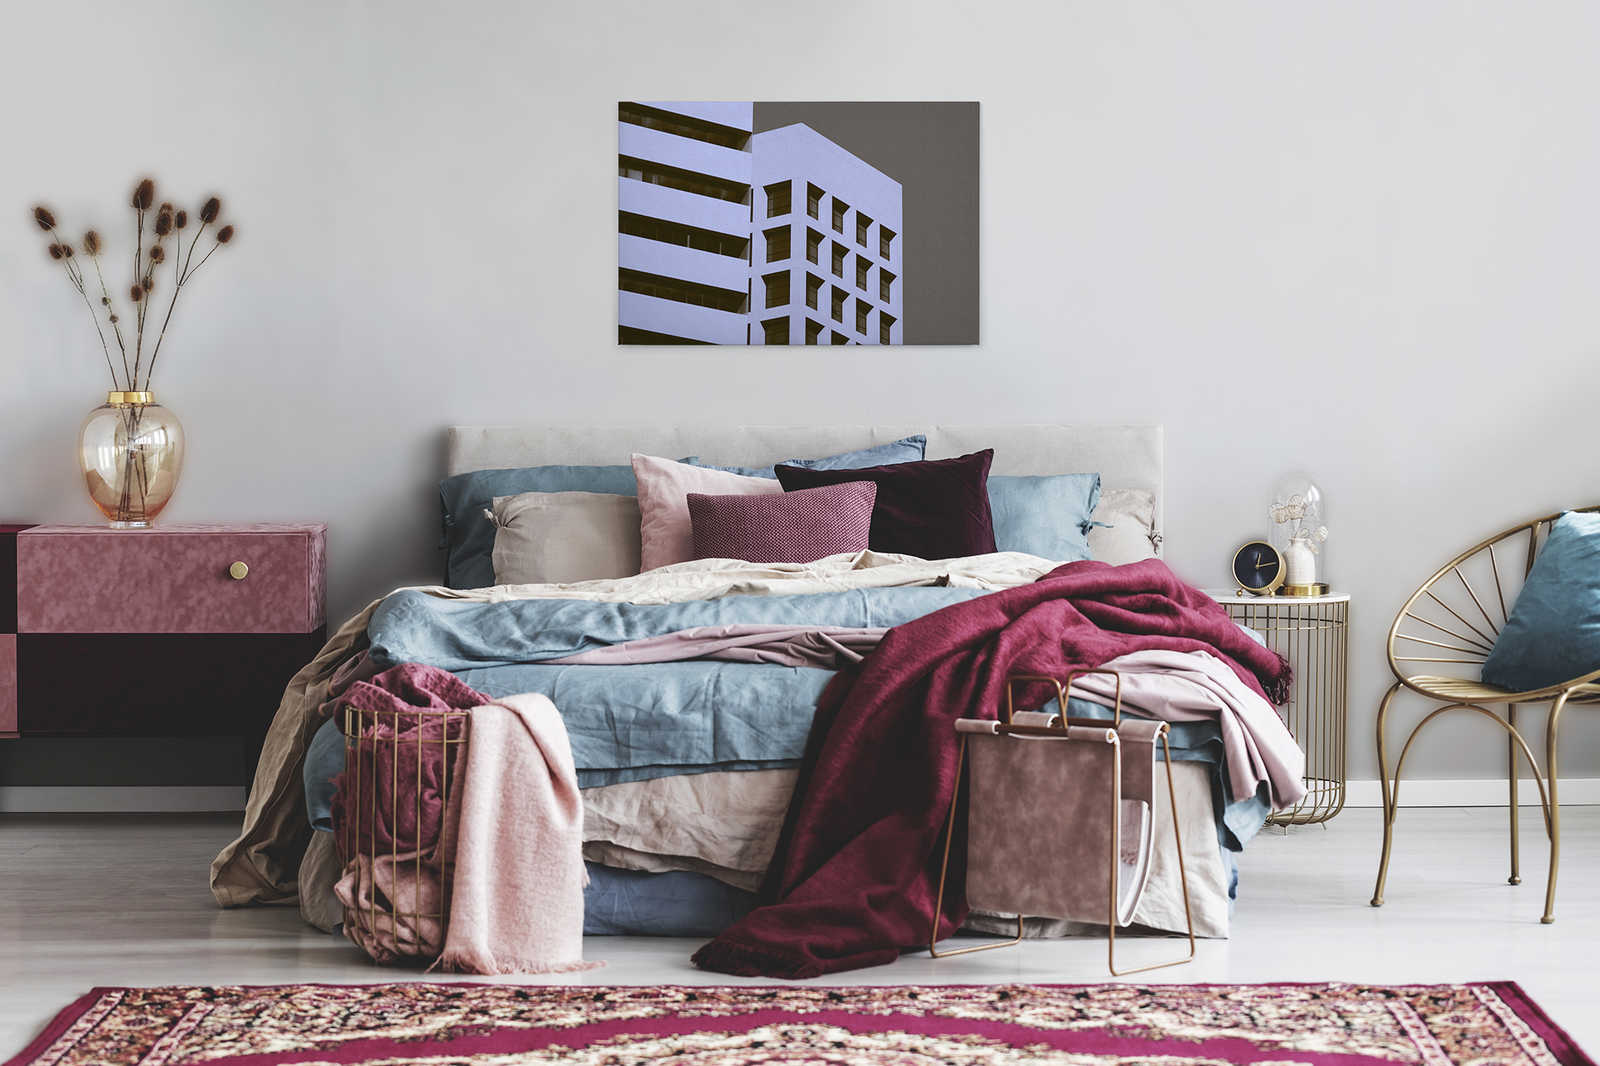             Skyscraper 1 - Canvas painting with building in retro look in roughcast structure - 0.90 m x 0.60 m
        